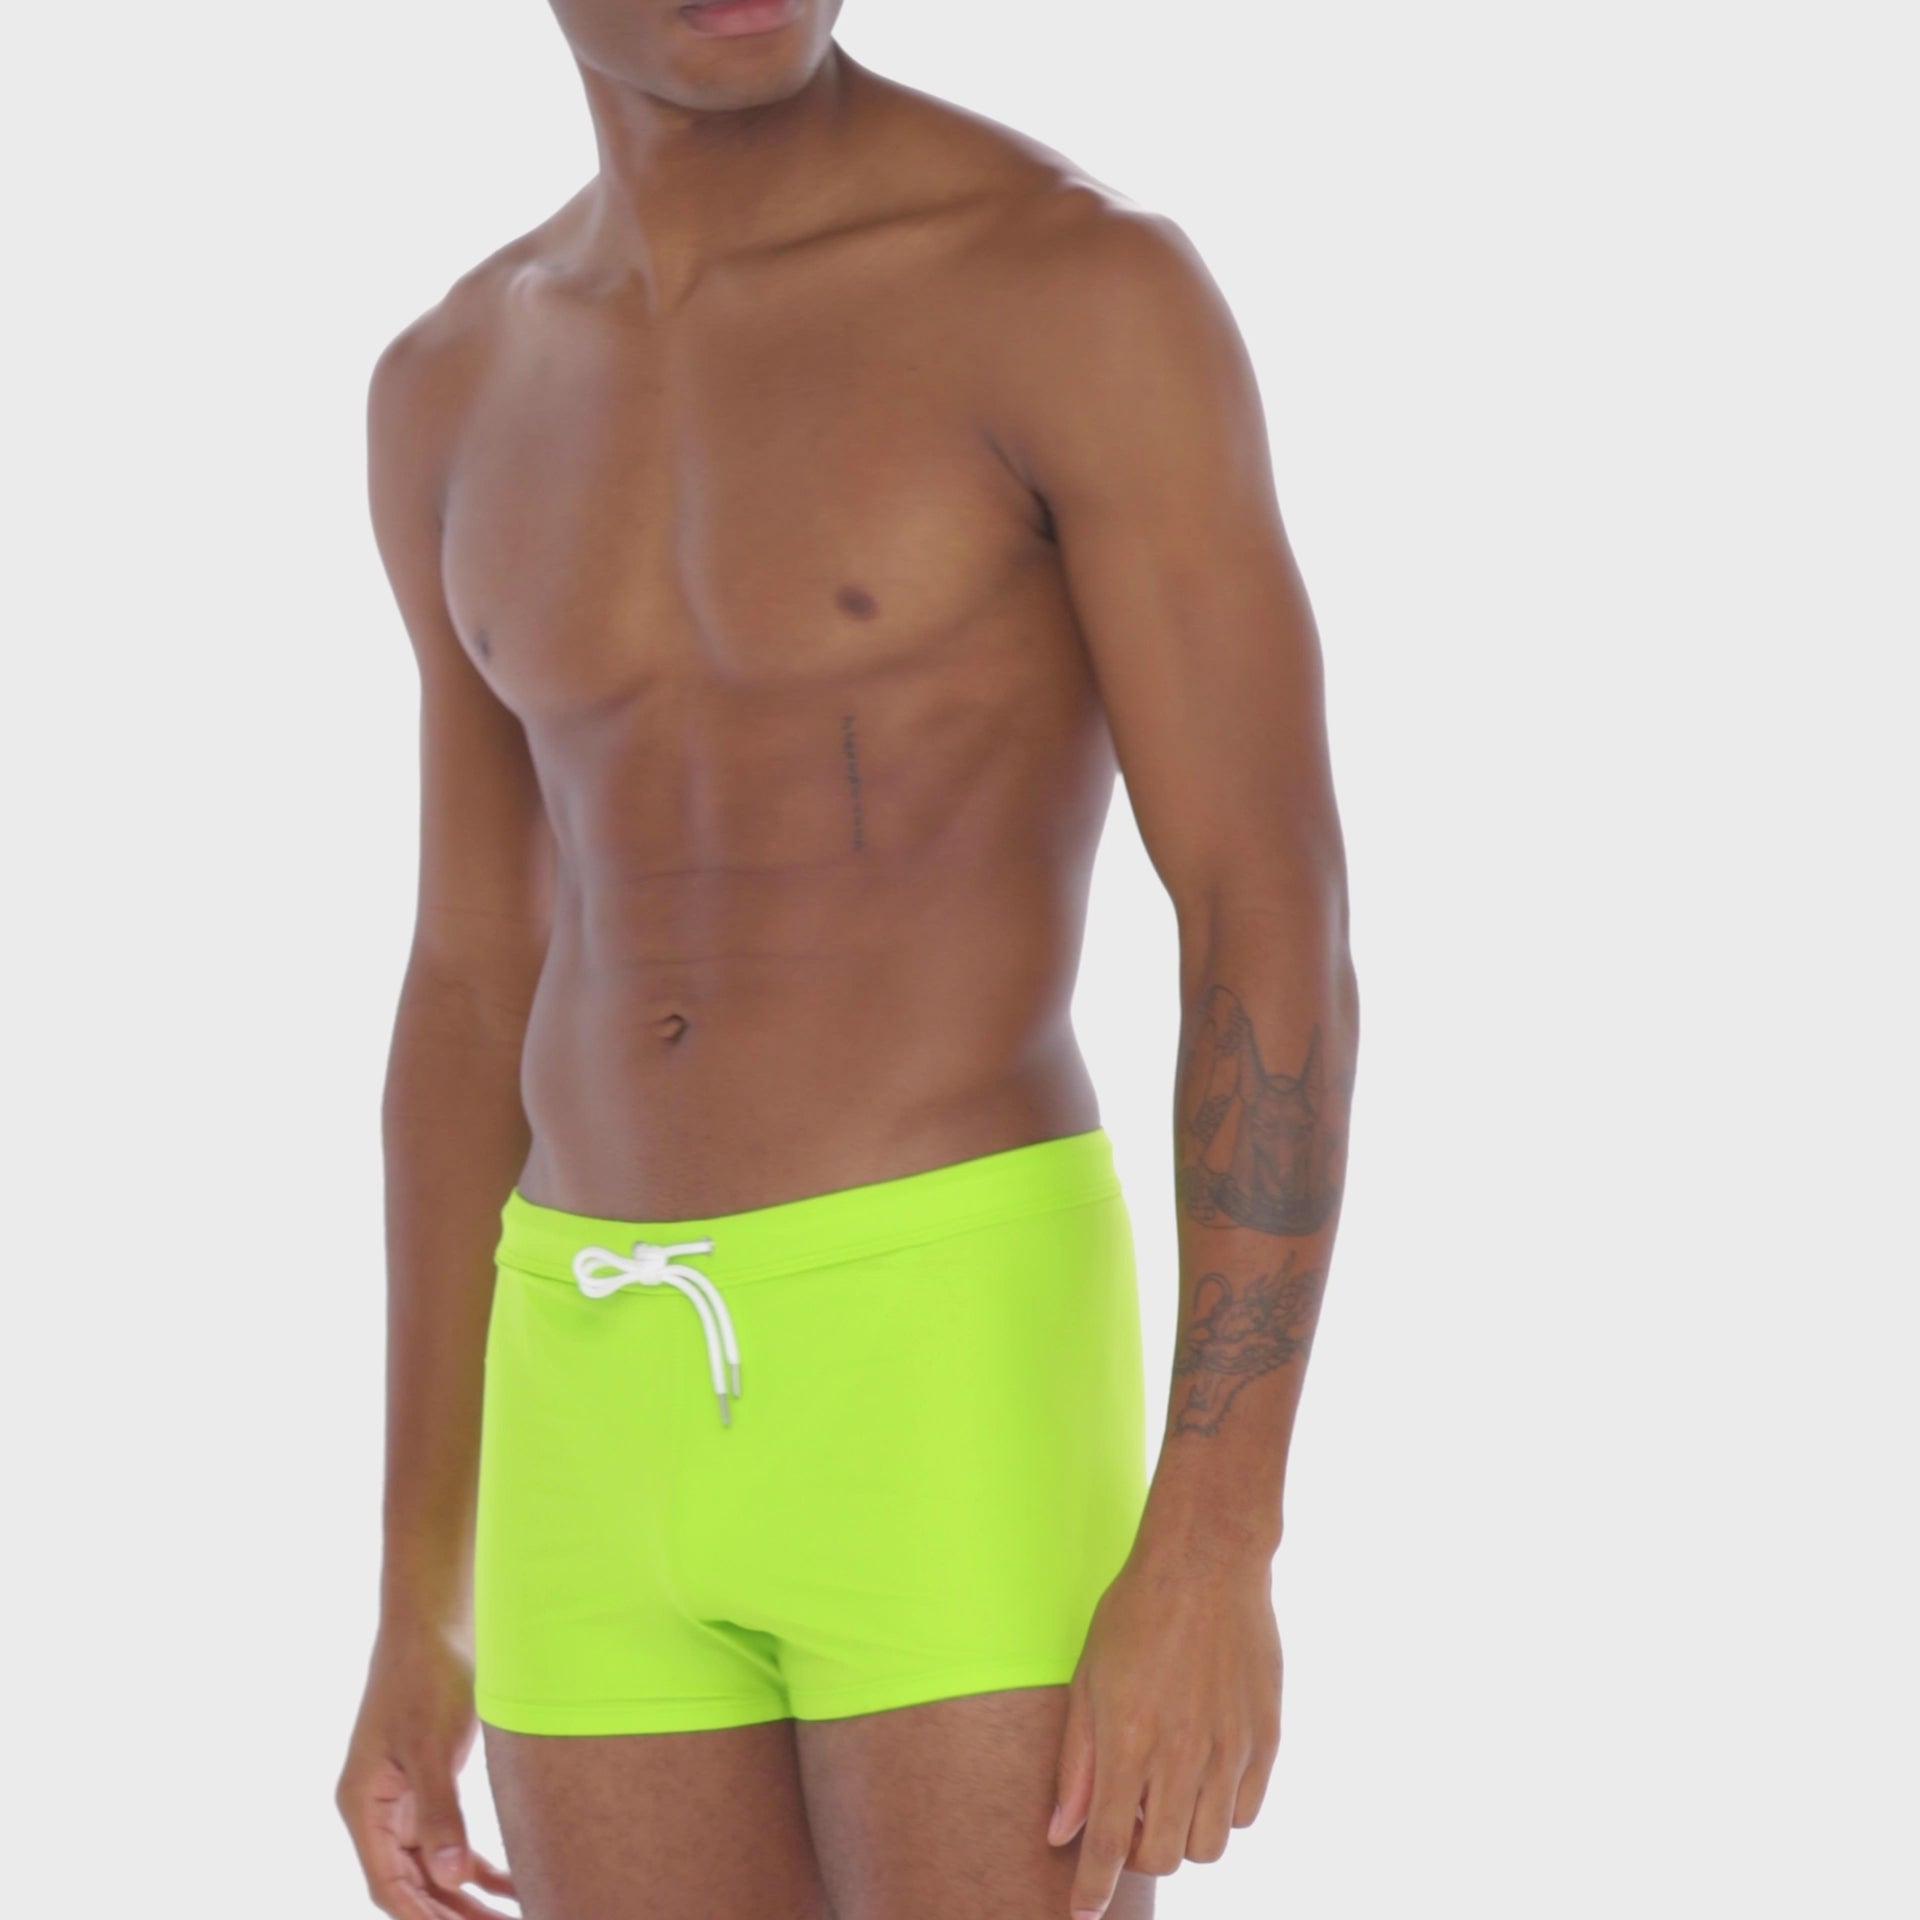 A WHITE WALL VIDEO OF A MALE MODEL WEARING A SAMMY SHOP UNISEX LIME ECO SWIM SHORT